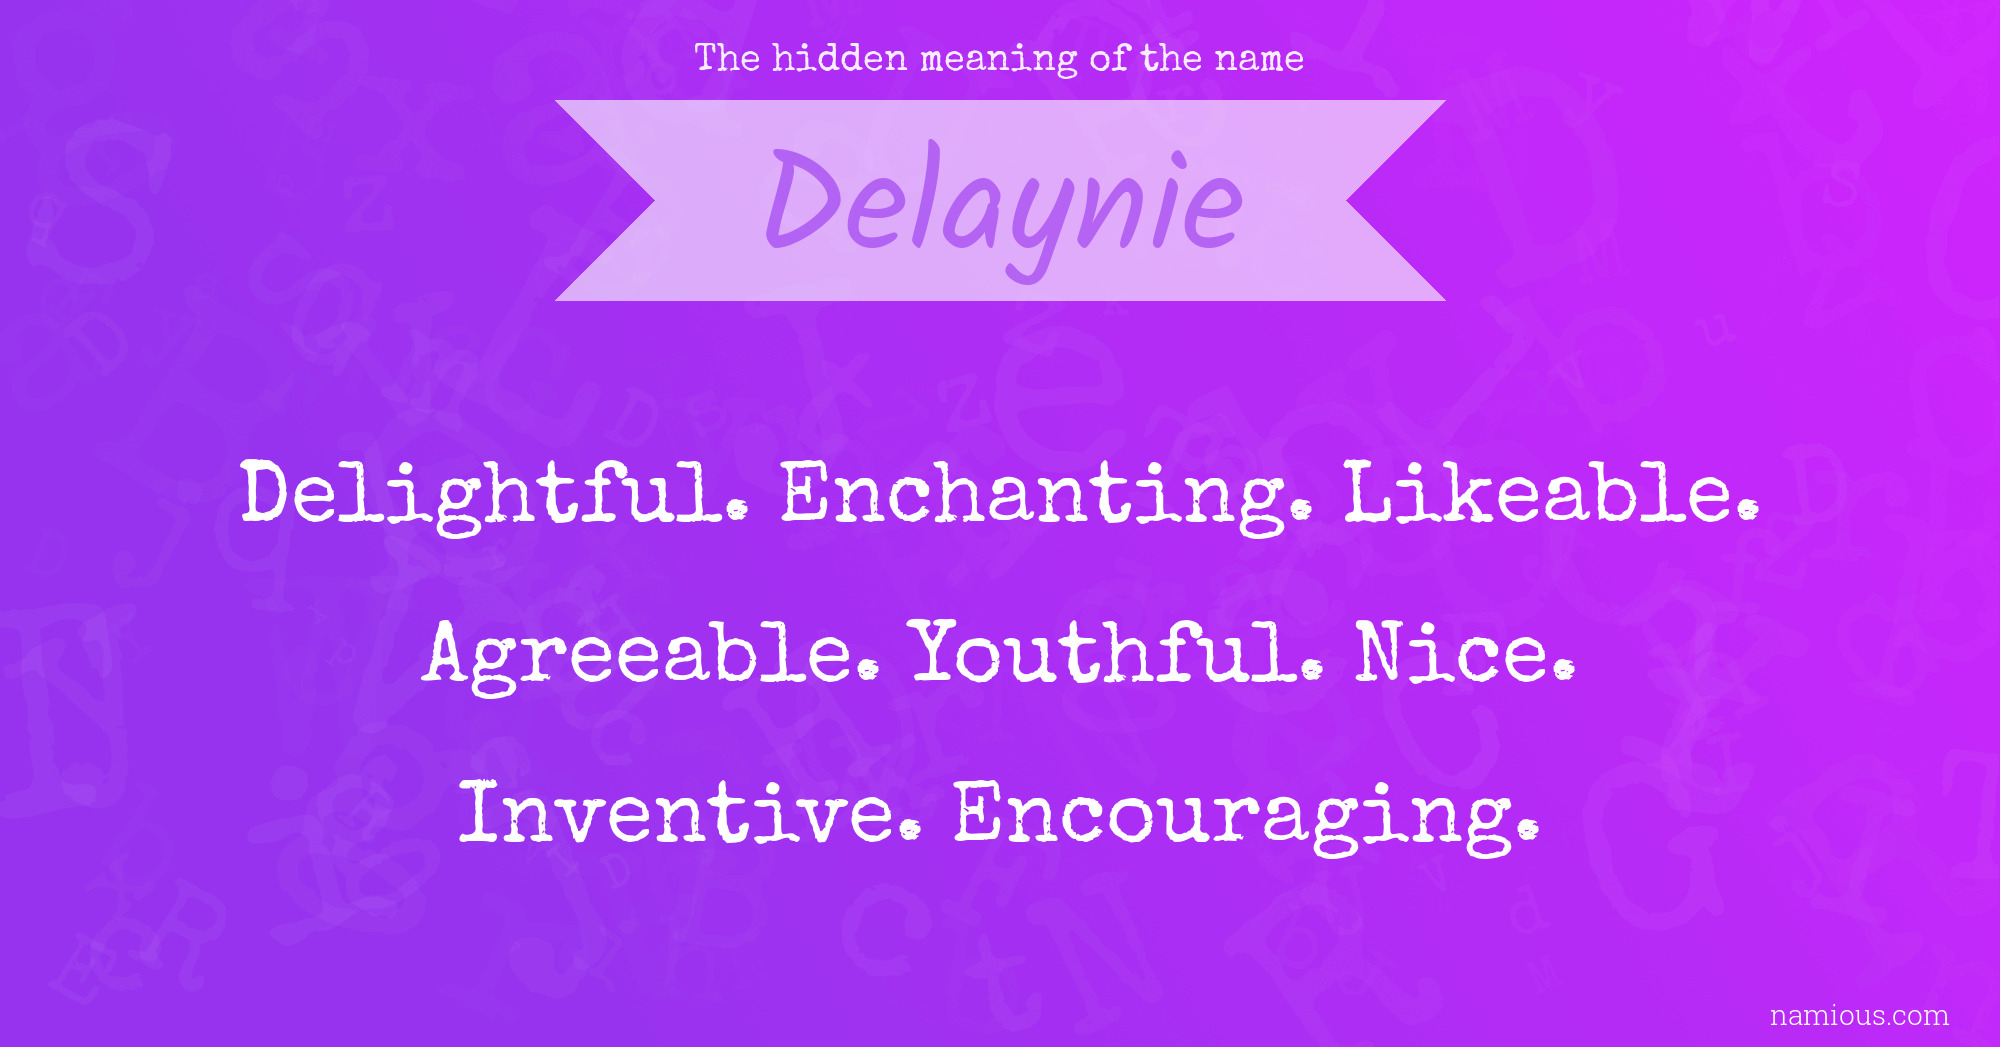 The hidden meaning of the name Delaynie